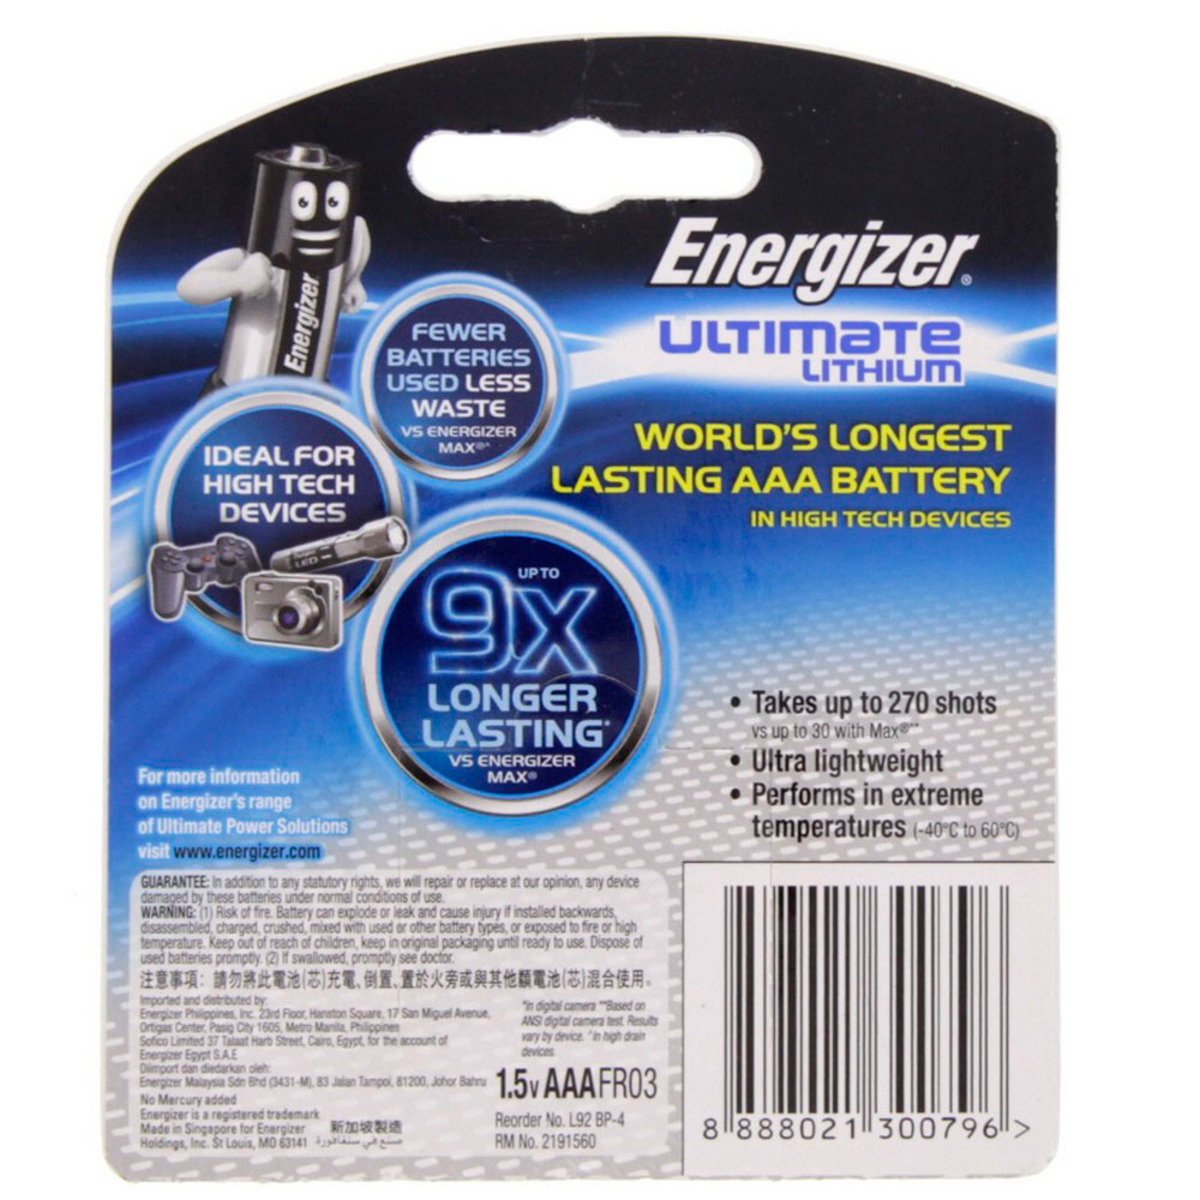 Energizer Ultimate Lithium AAA battery L92BP4, Pack of 4 Pcs